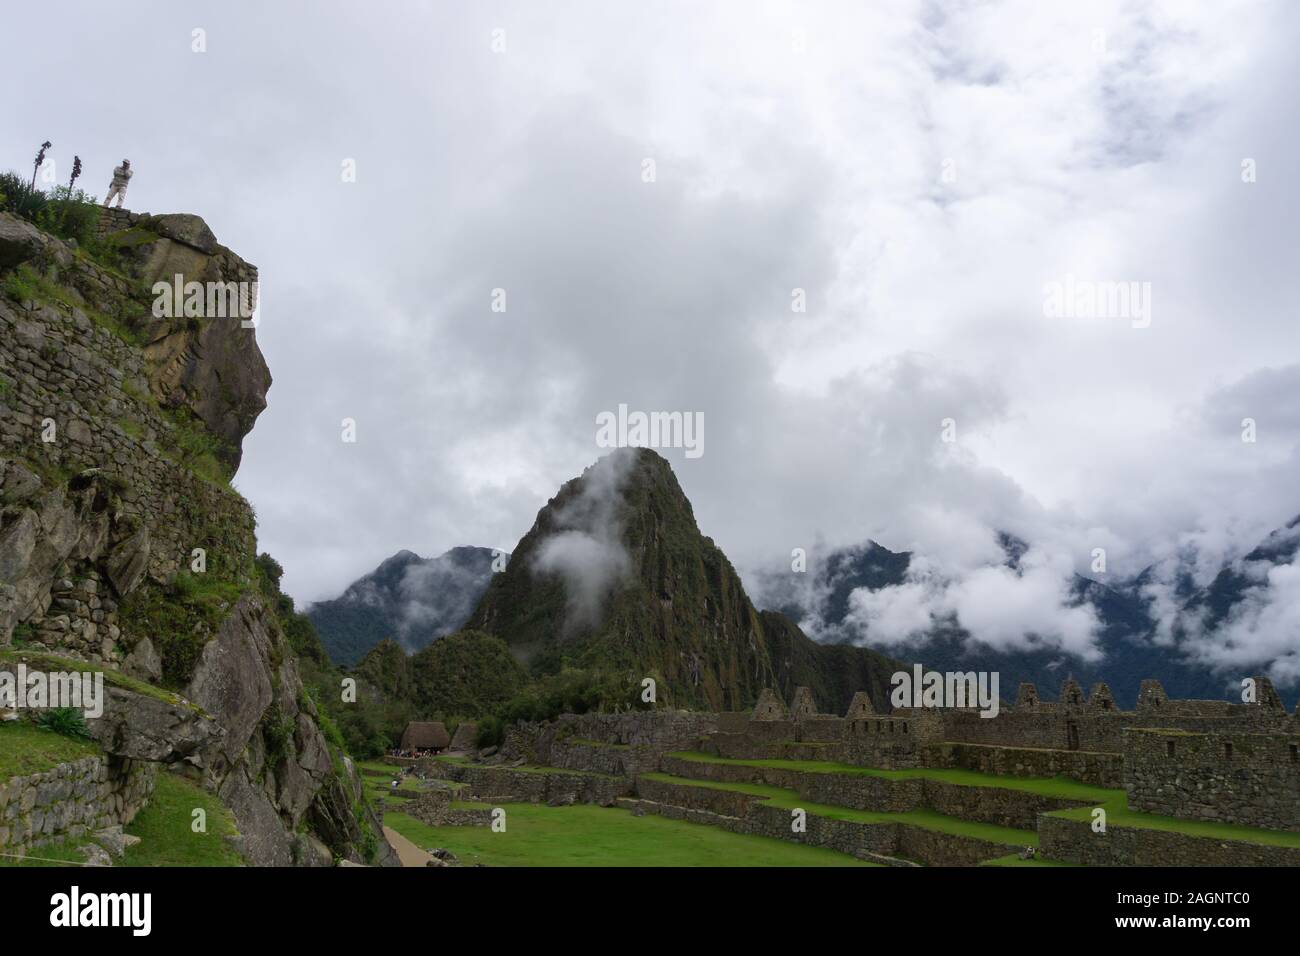 The breathtaking beauty of nature & the mystery of the archaeological site in Machu Picchu create a magical blend of reality with the unprecedented. Stock Photo